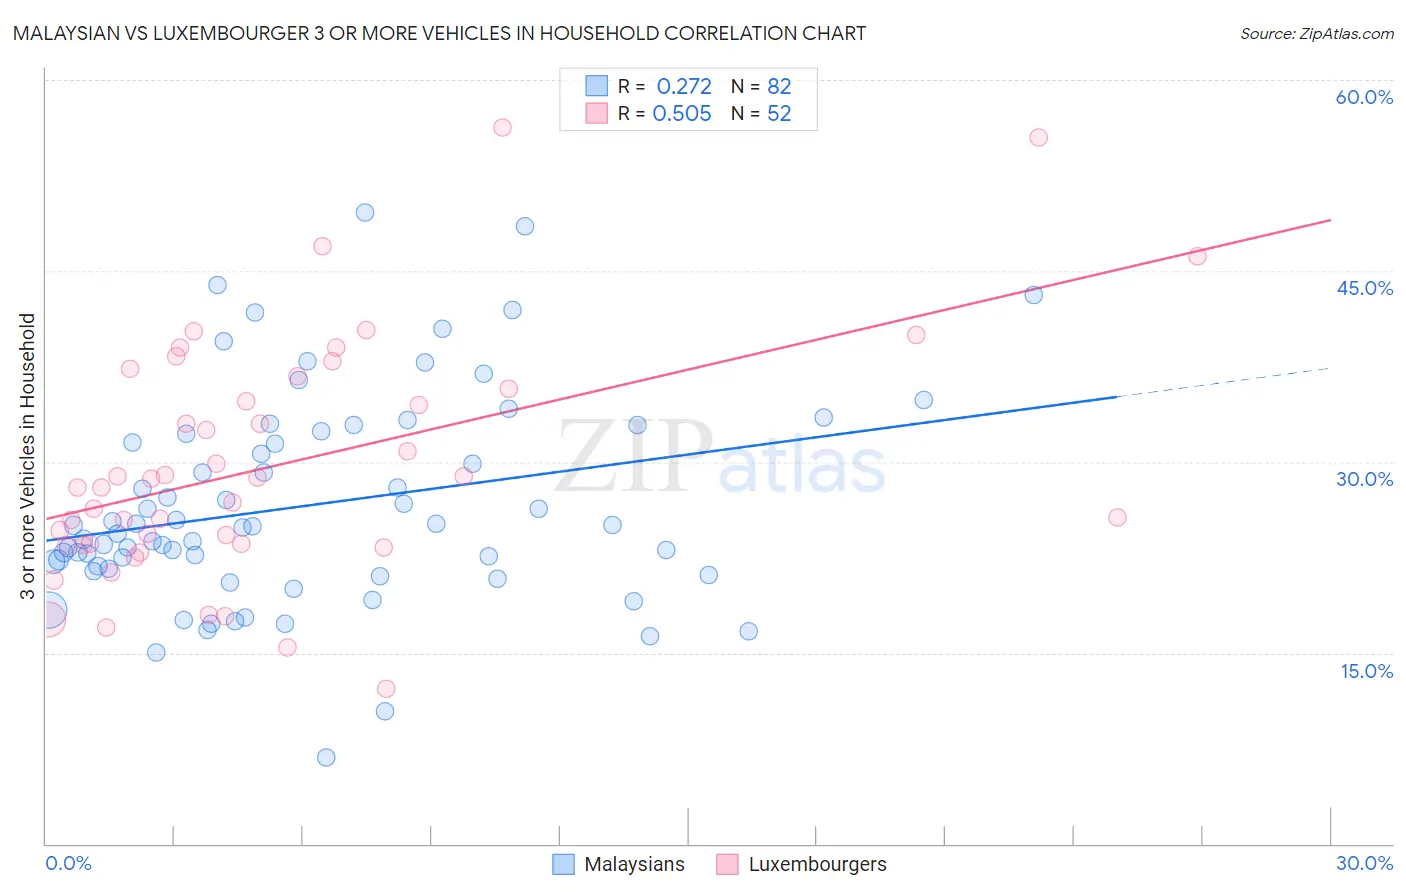 Malaysian vs Luxembourger 3 or more Vehicles in Household